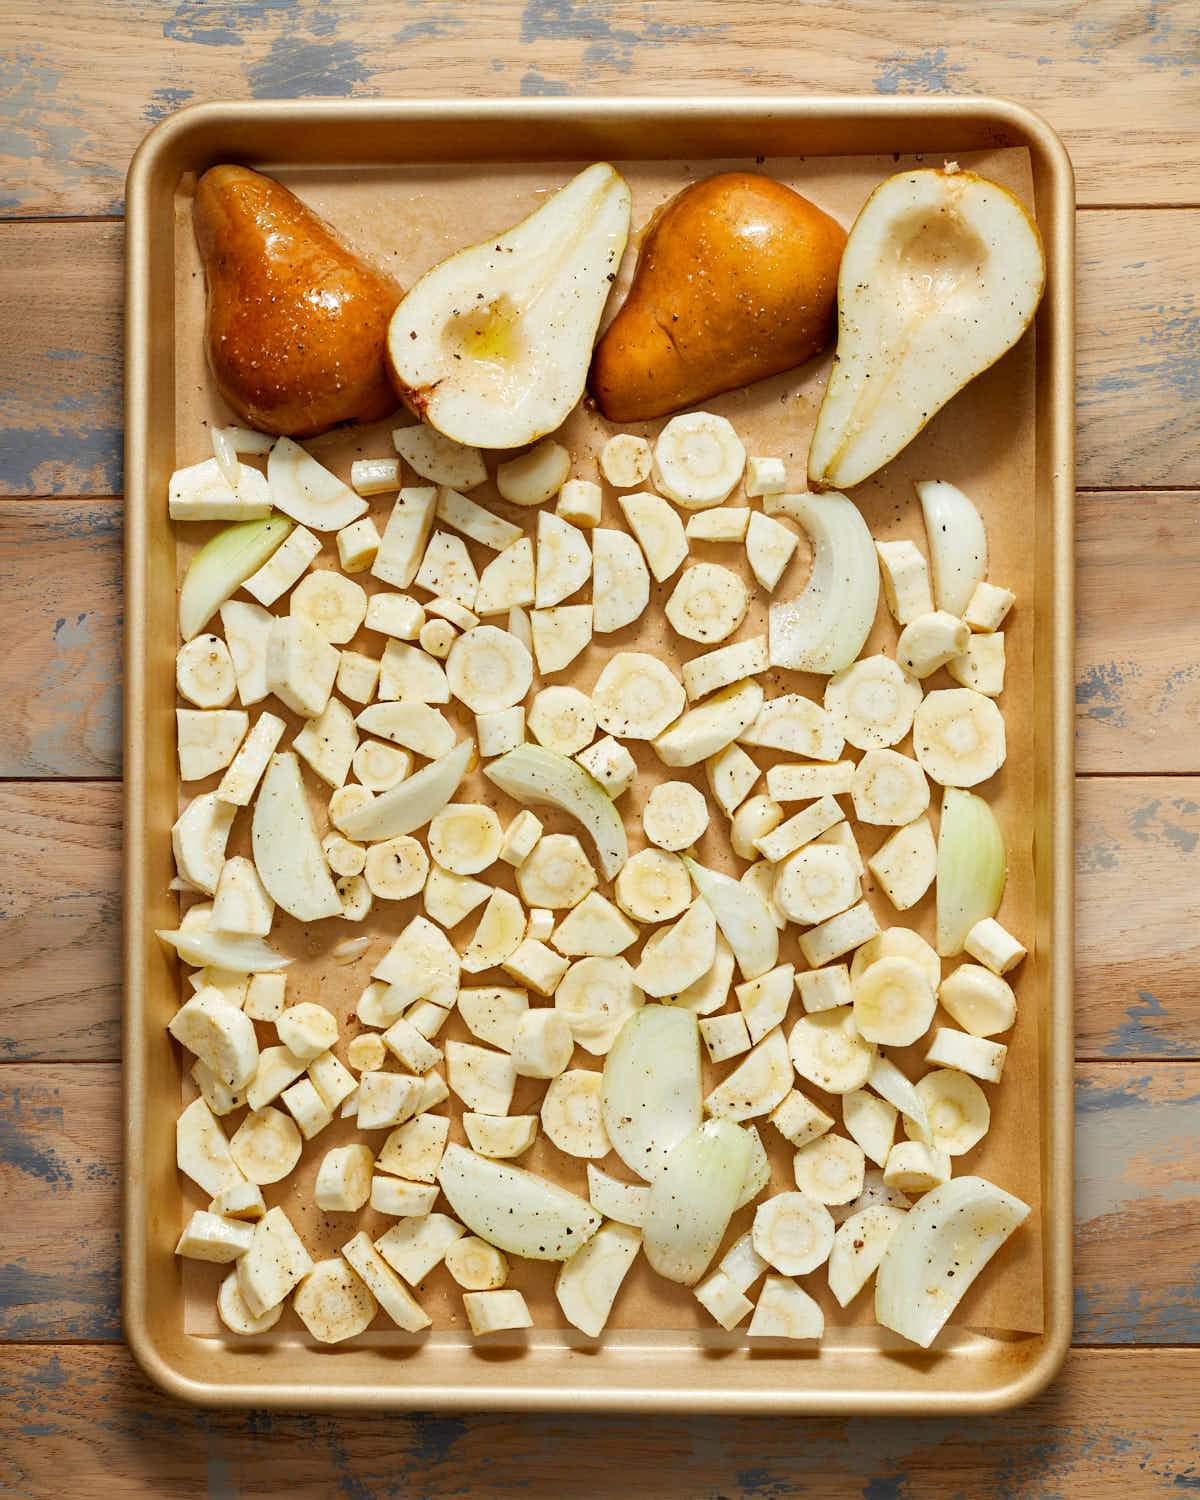 Chopped parsnip, pear halves, sliced onions and garlic arranged in single layer on a baking sheet.